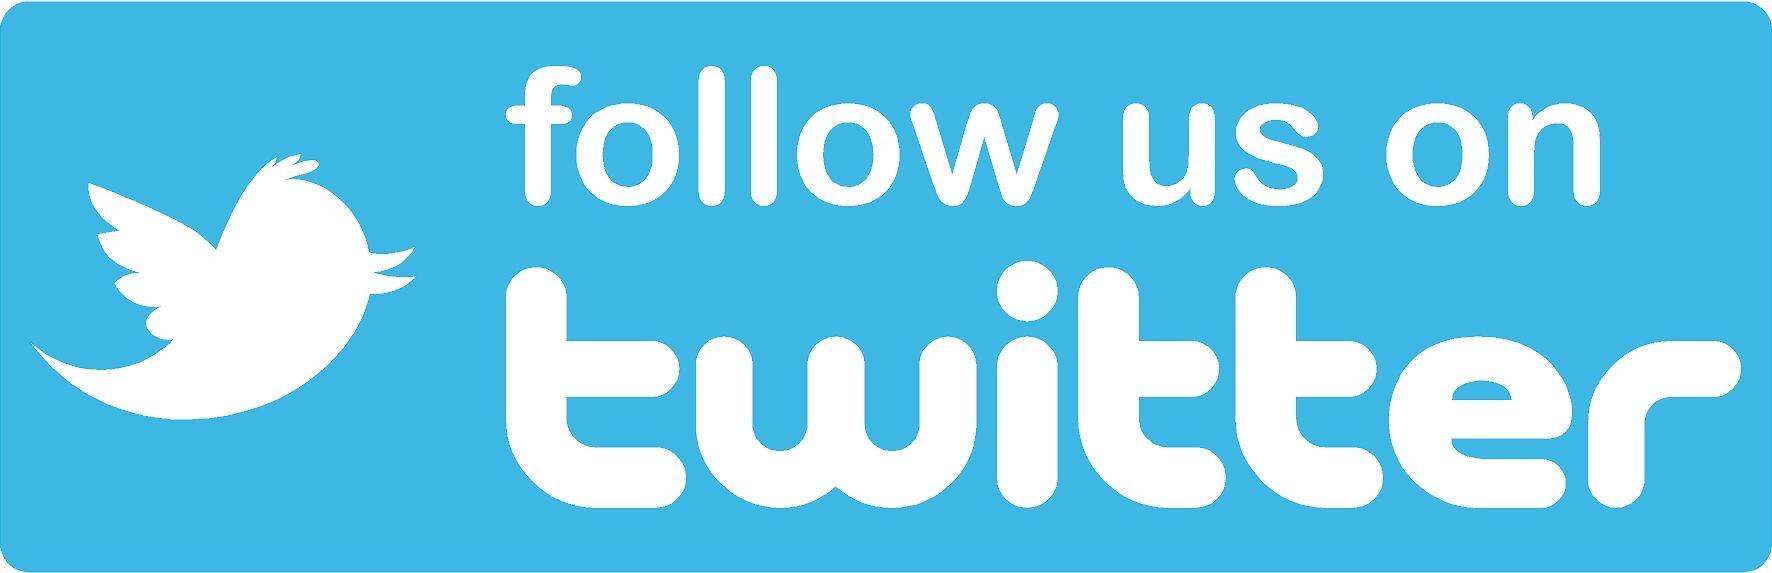 Find Us On Twitter Logo - Get events and more at Twitter! :Carnival Village Trust